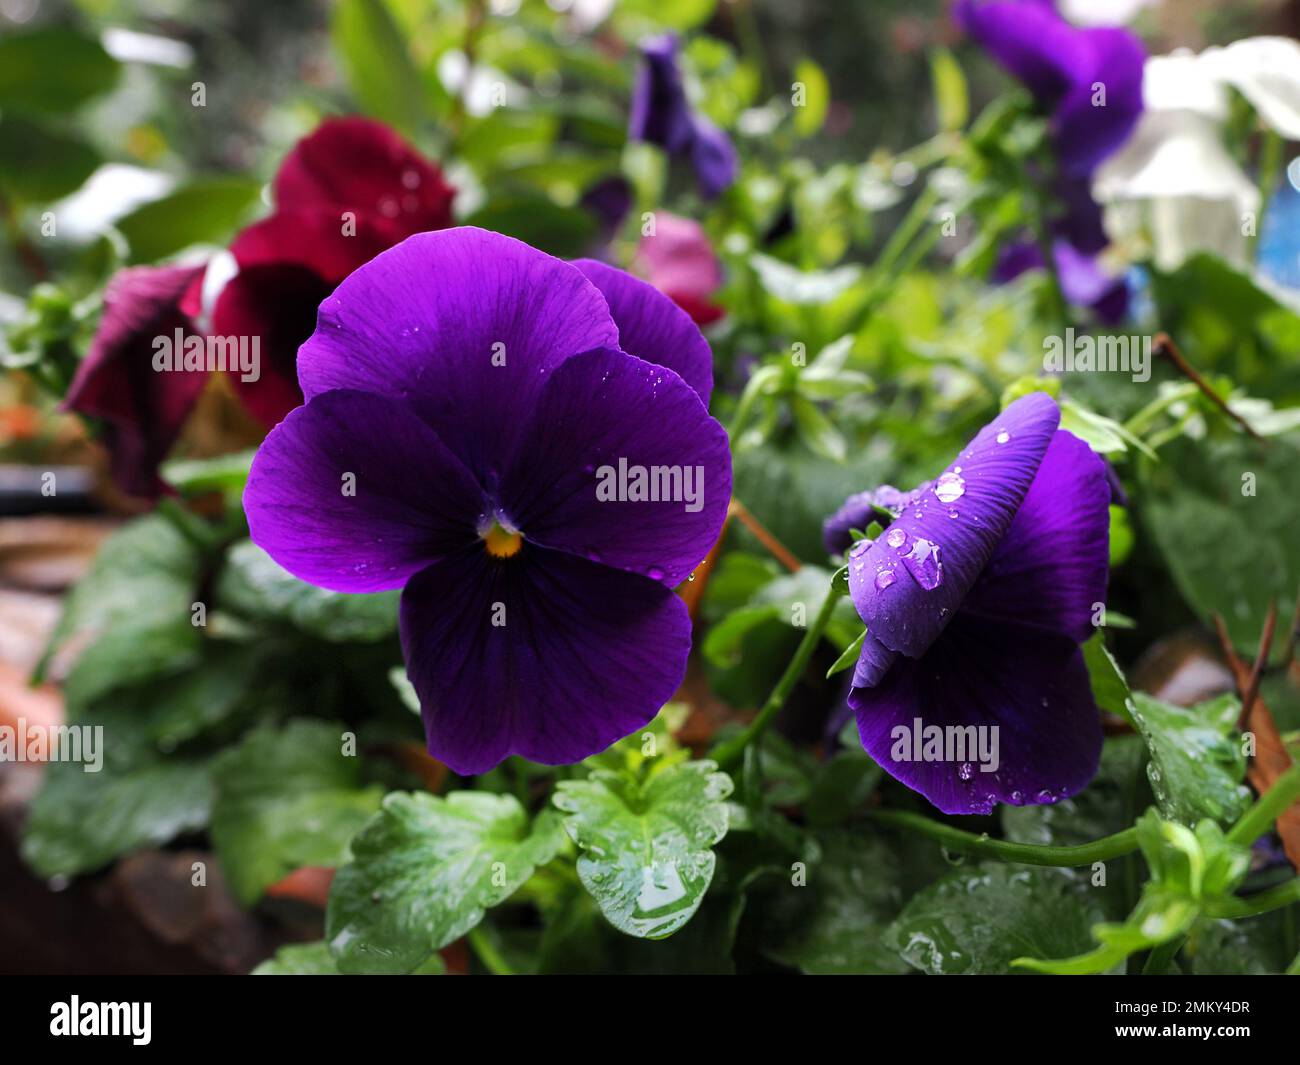 Pansy flowers in the rain on a blurred background. Stock Photo